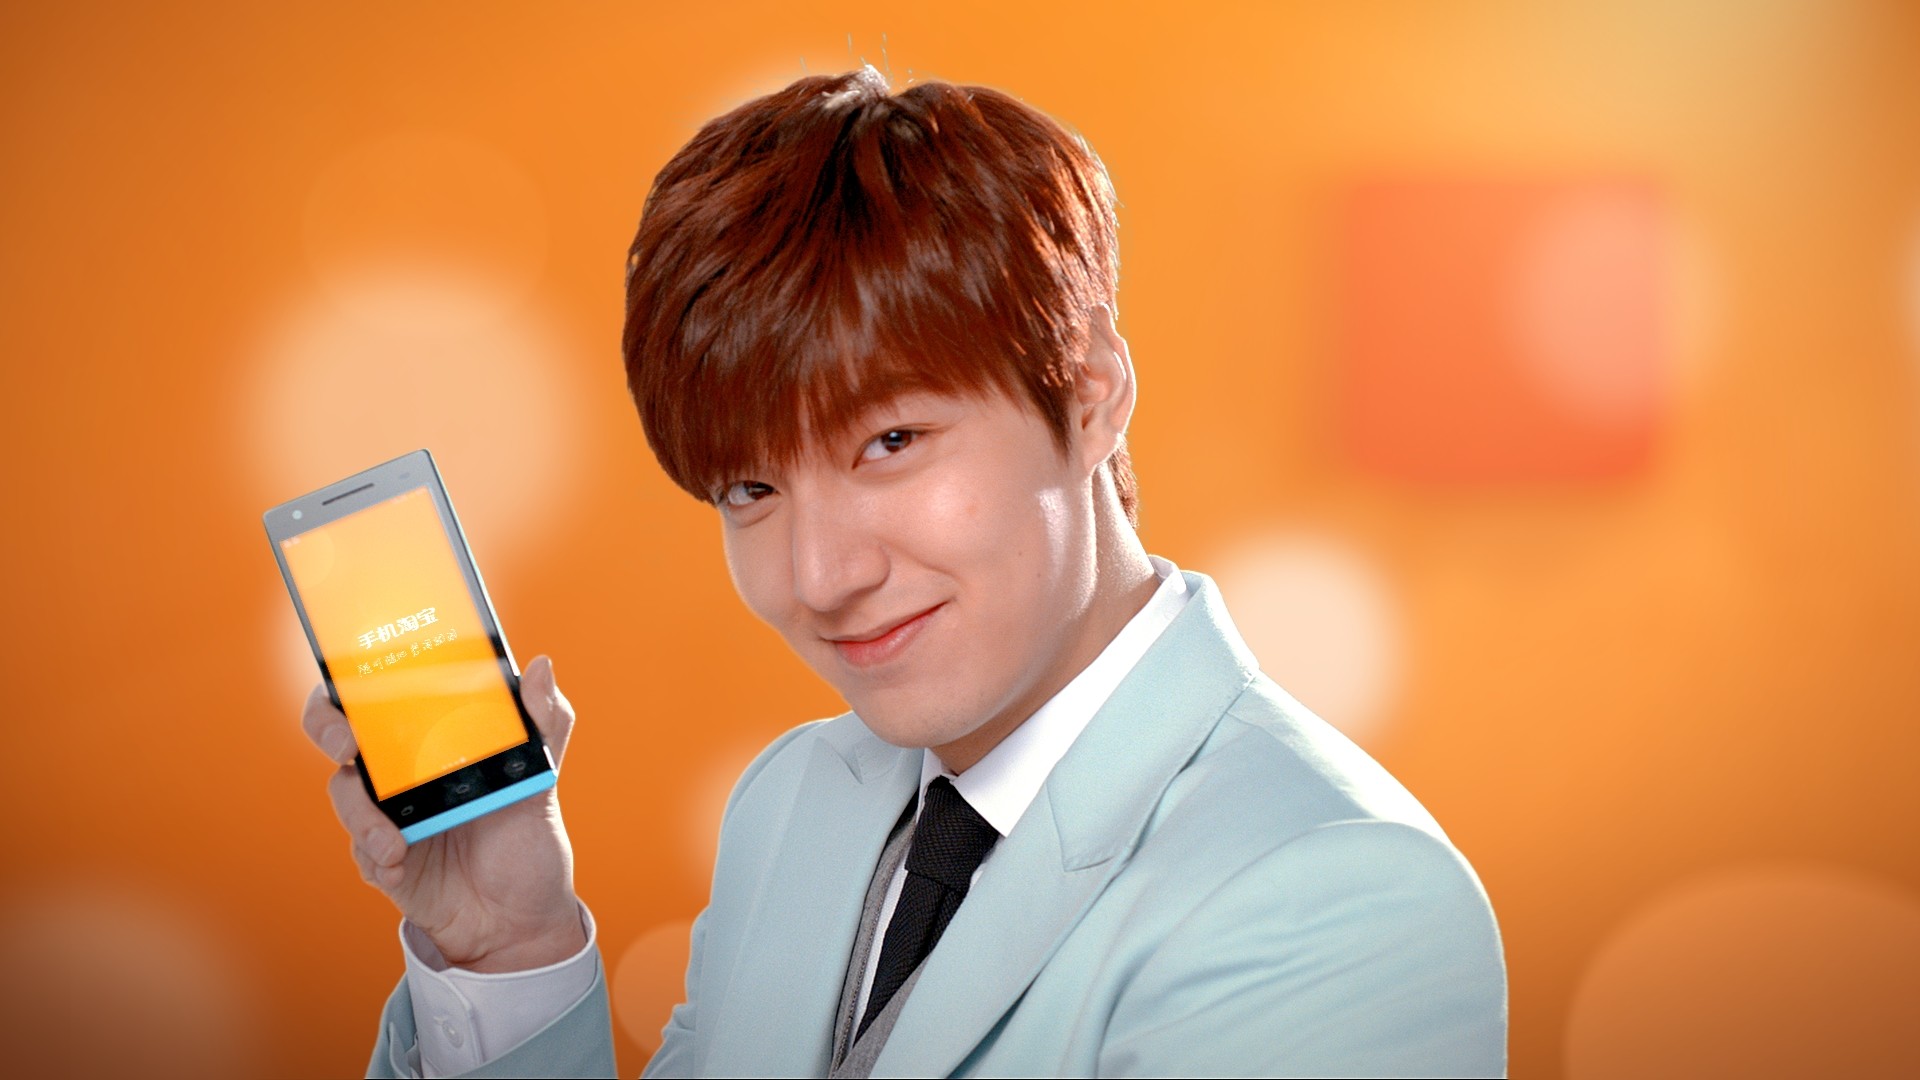 1920x1080 News has it that Lee Min Ho is having an endorsement deal with a Chinese  mobile brand, receiving an endorsement fee offer of 2million USD.